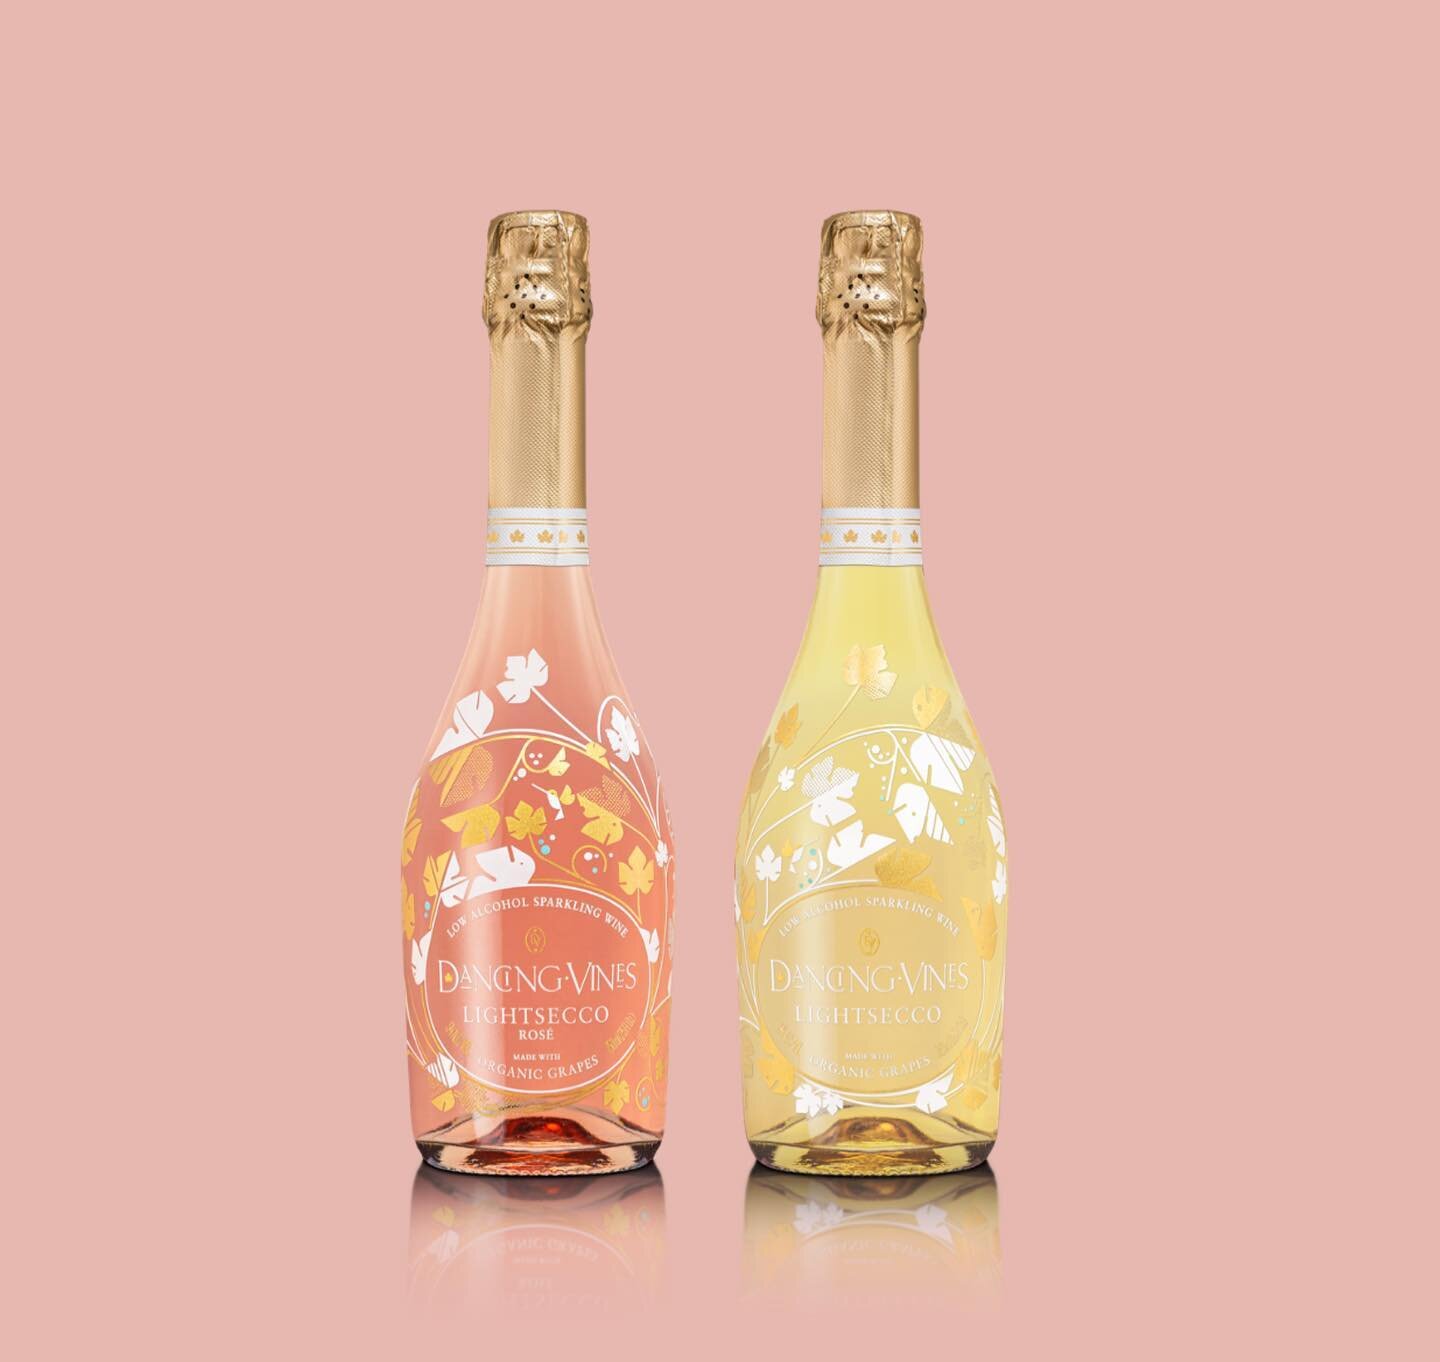 Dancing Vines Lightsecco comes in two varieties: White and ros&eacute;. Equally light, delicious and refreshing. ✨🥂